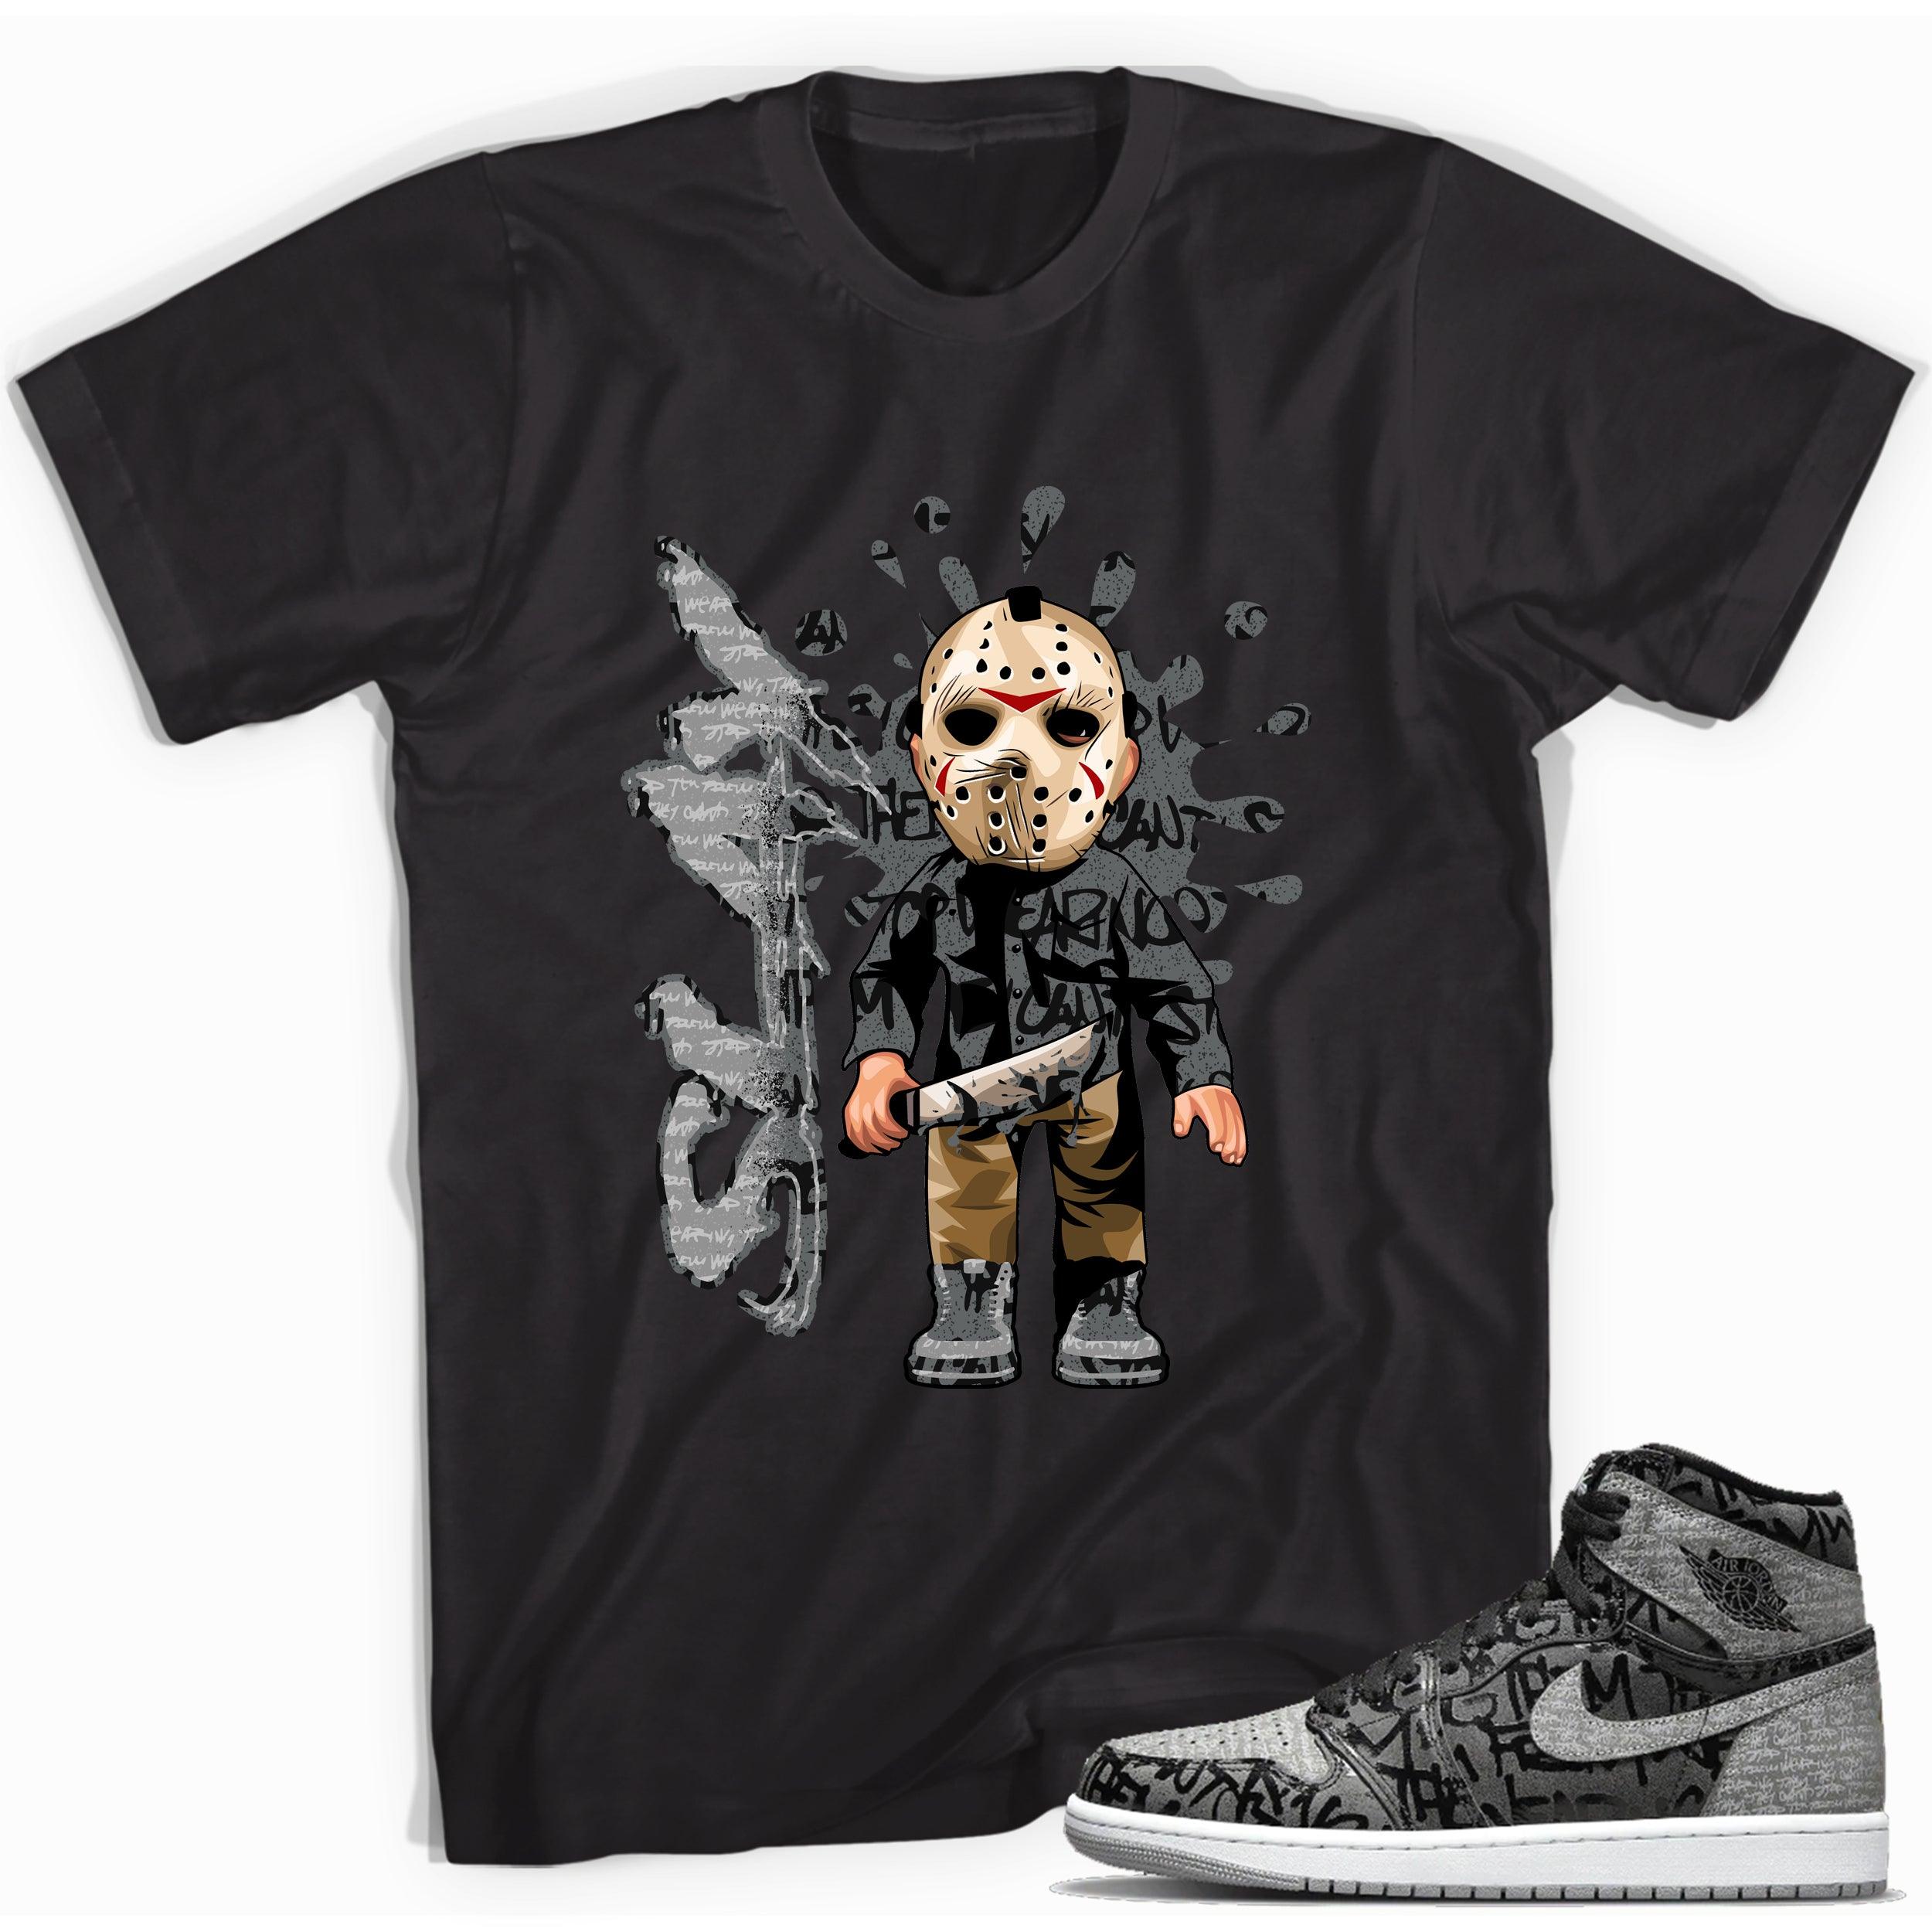 Friday the 13th Sneaker Tee photo